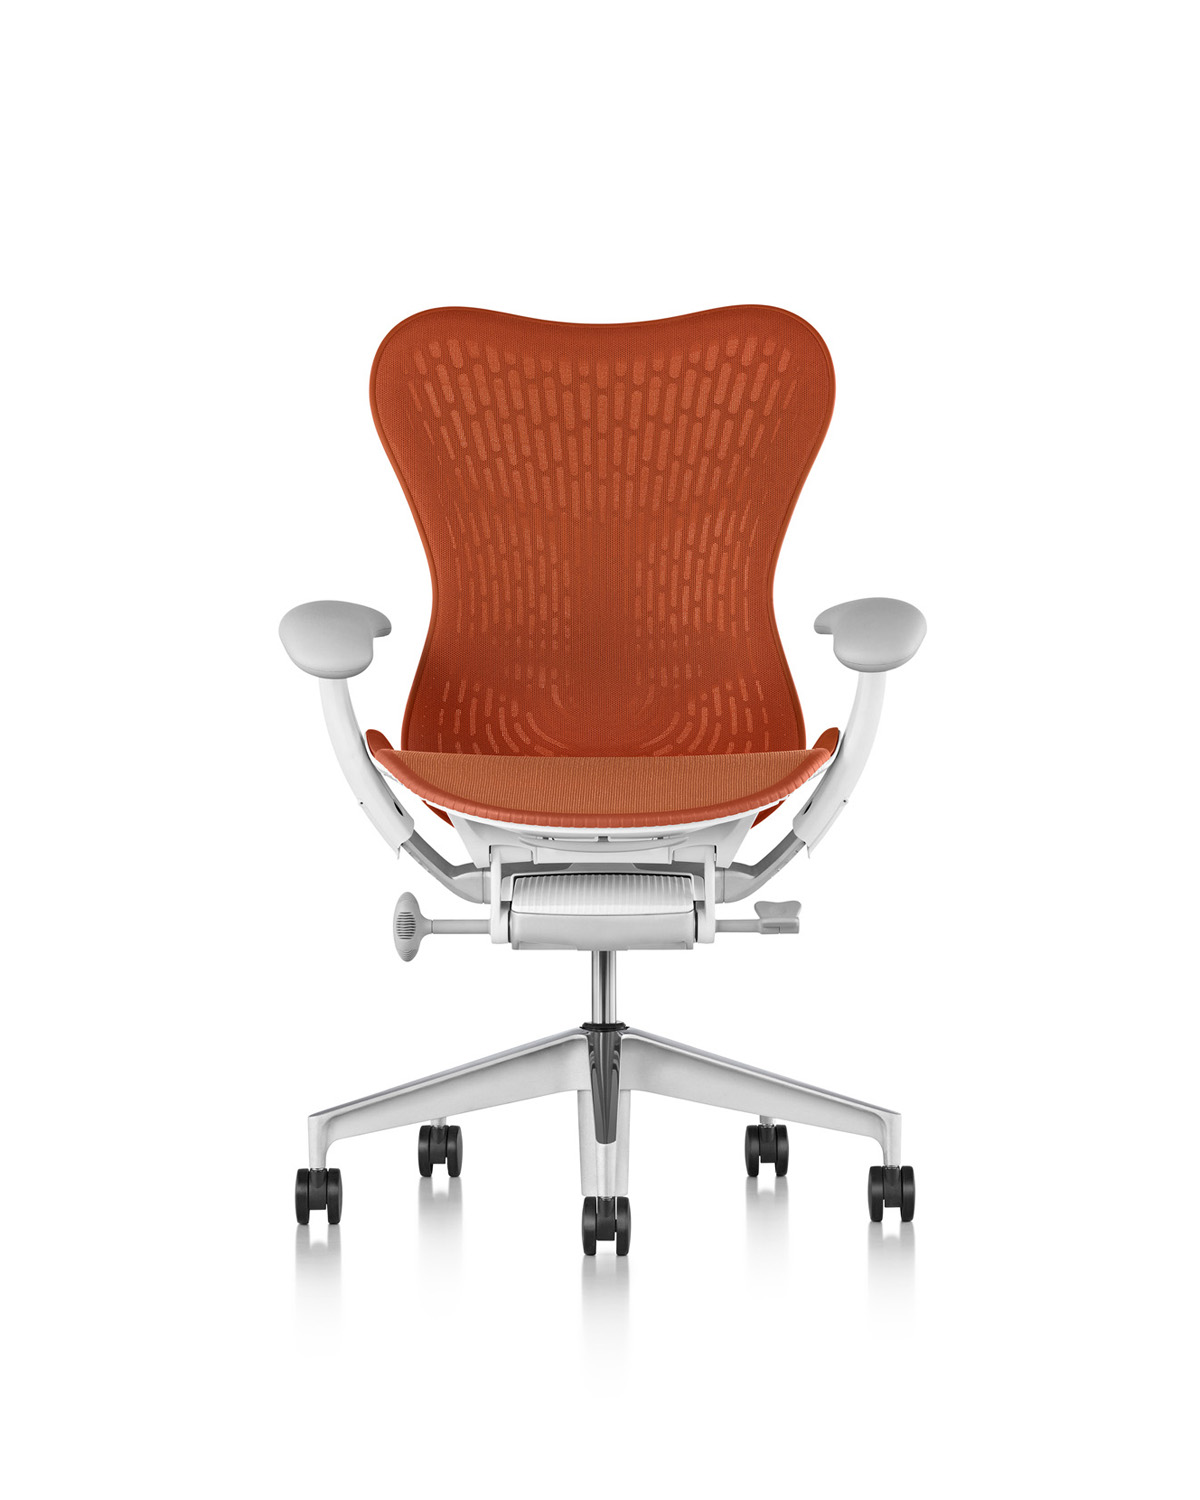 The Role Of Ergonomic Chairs In Improving Workplace Comfort And Posture